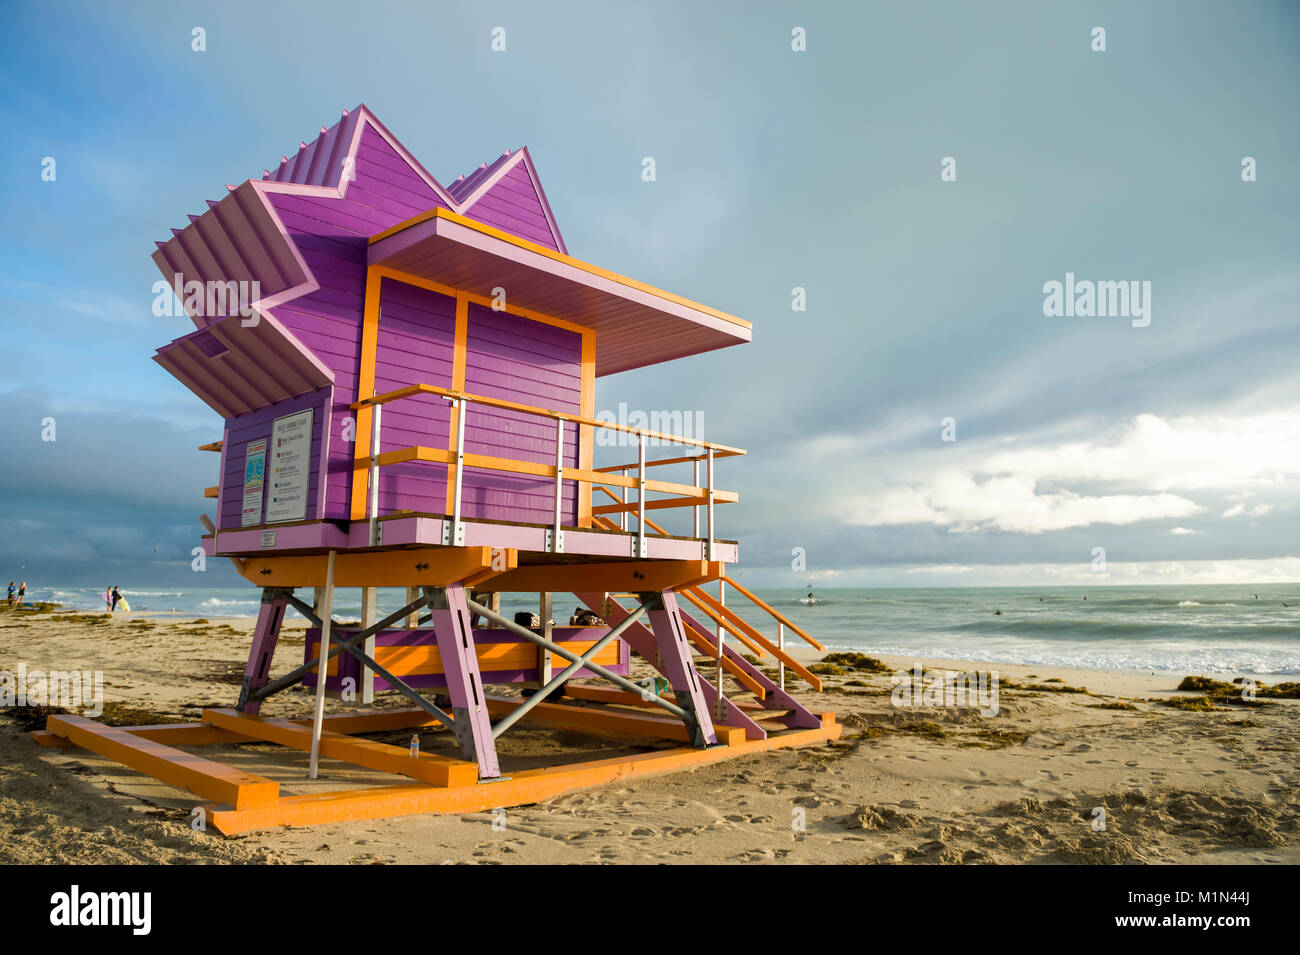 Scenic morning view of an iconic colorful lifeguard tower on South Beach, Miami Stock Photo